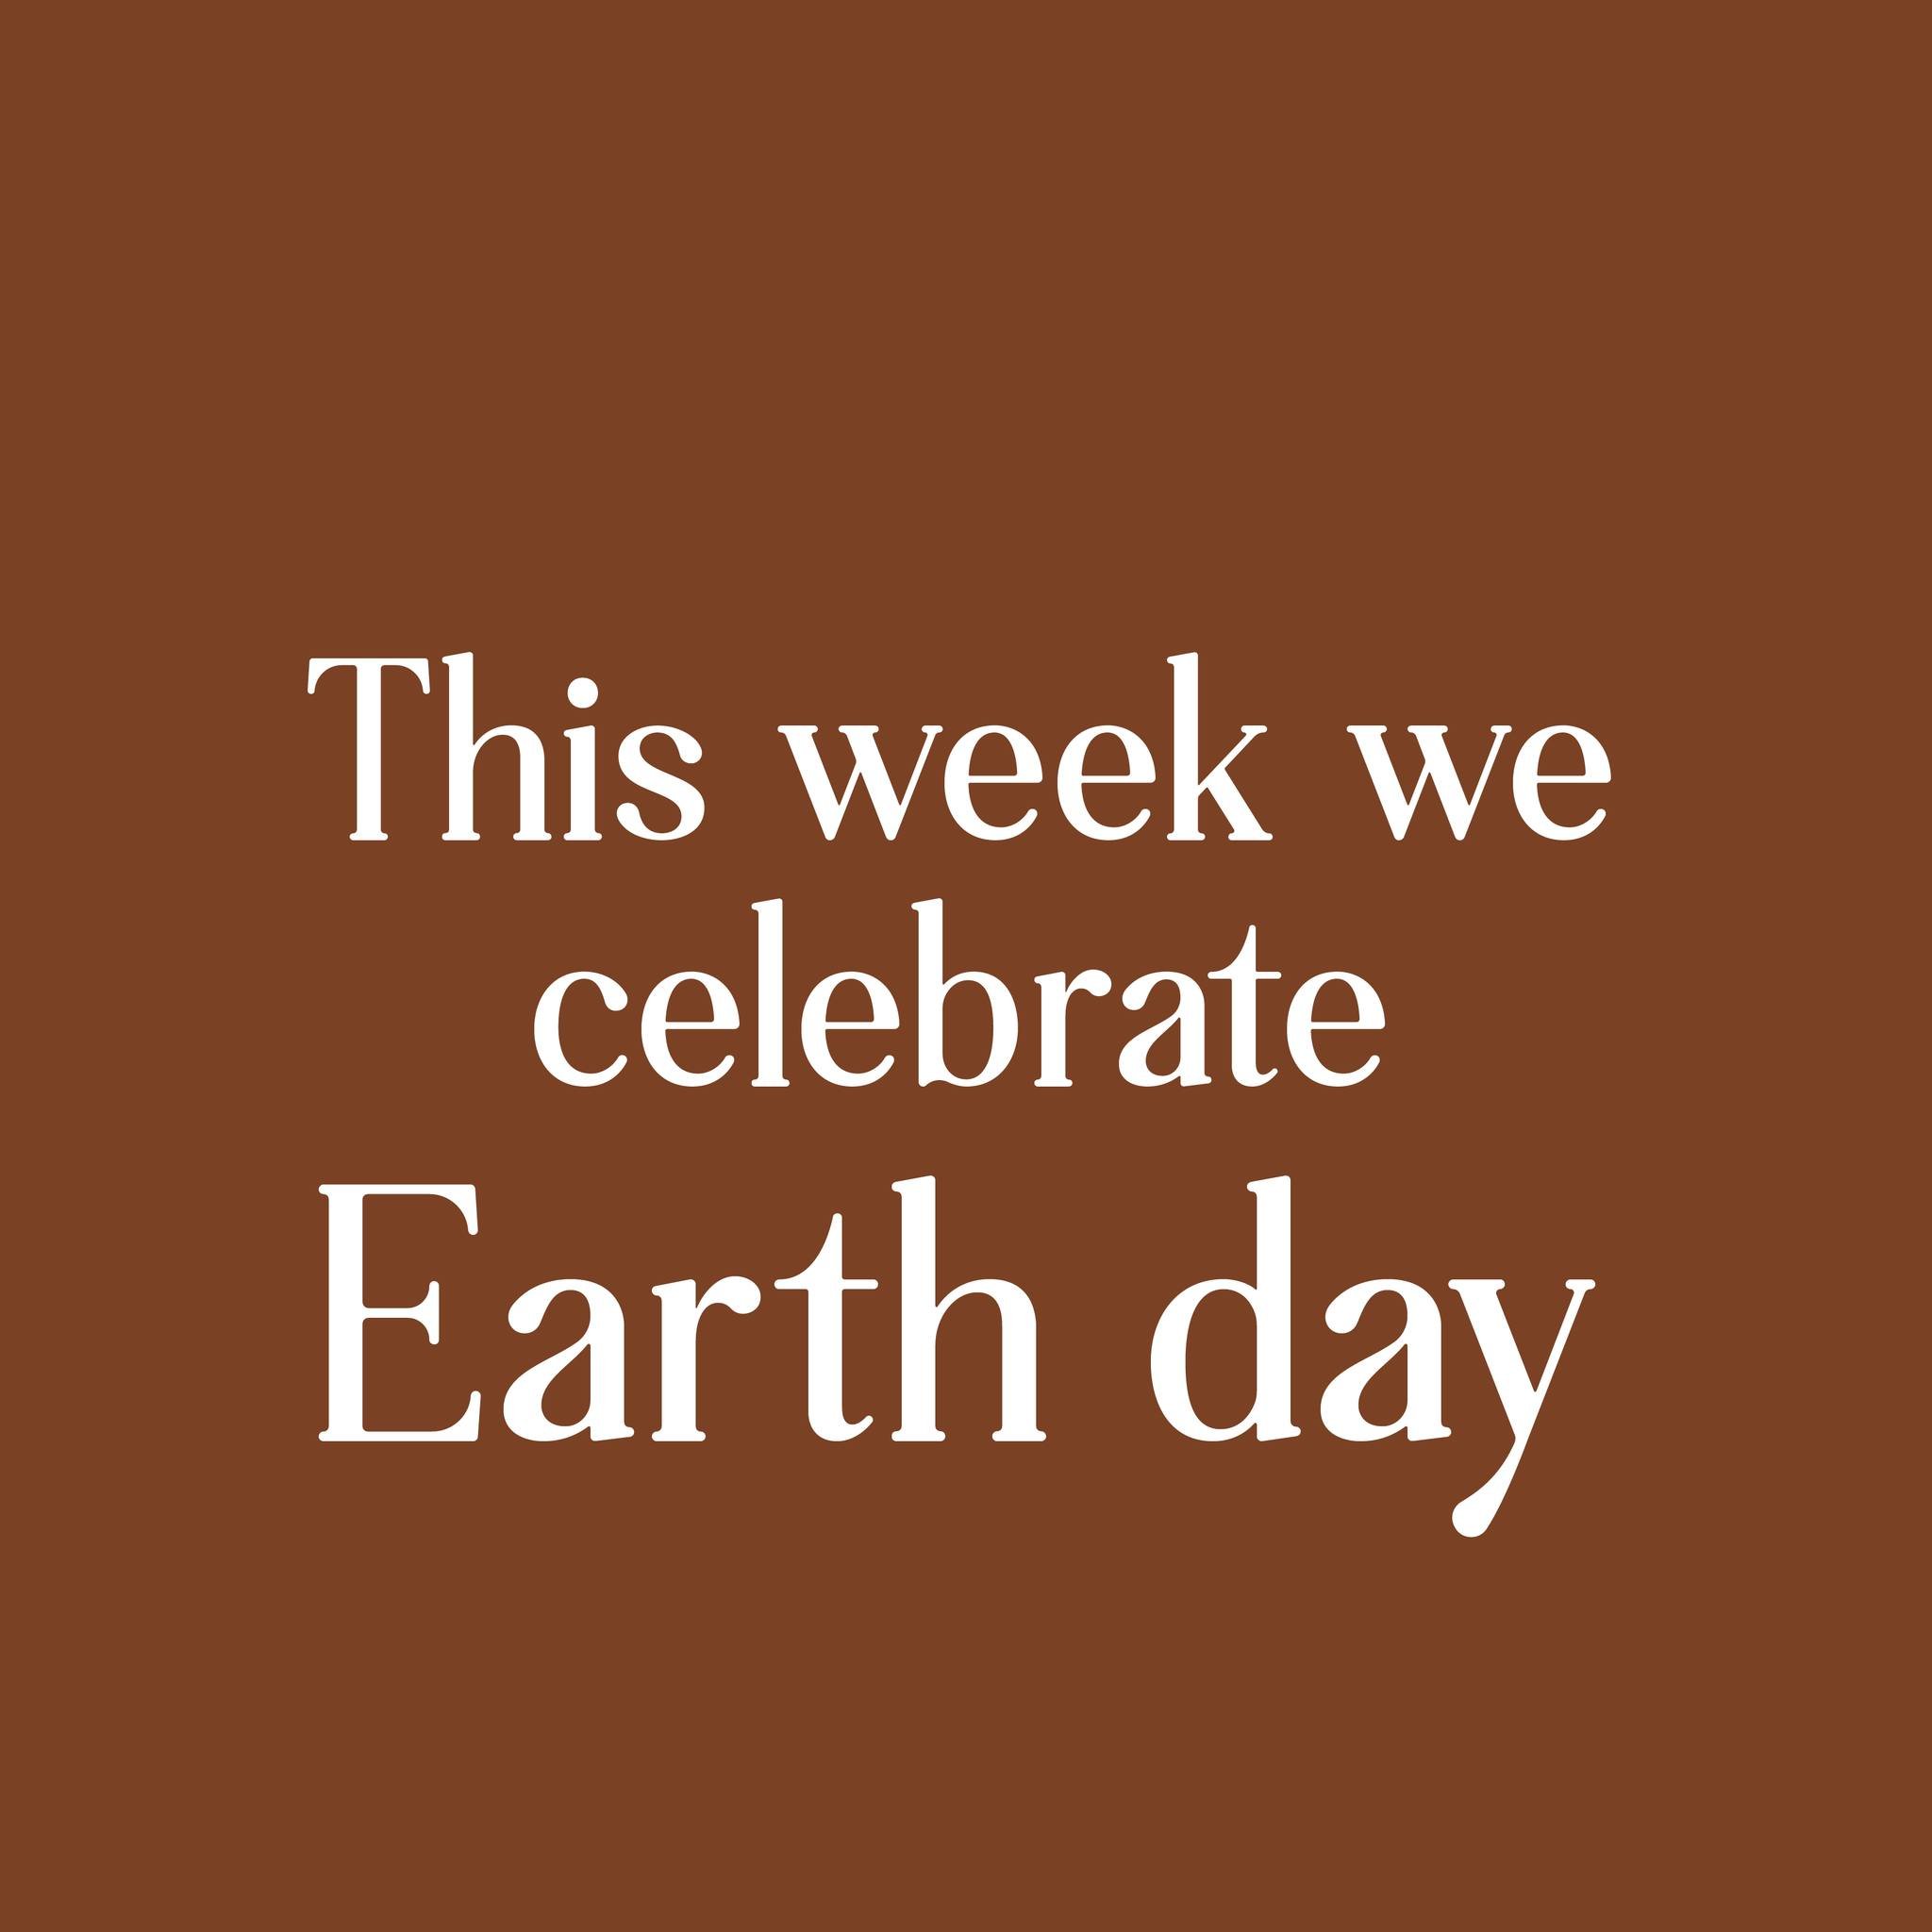 This week we celebrate Earth day. We want to acknowledge the hard work of our partners producers who have been committed to preserving the environment through organic and biodynamic farming.

#earthday🌎 #organicwinemaker #nycwine #biodynamicfarming